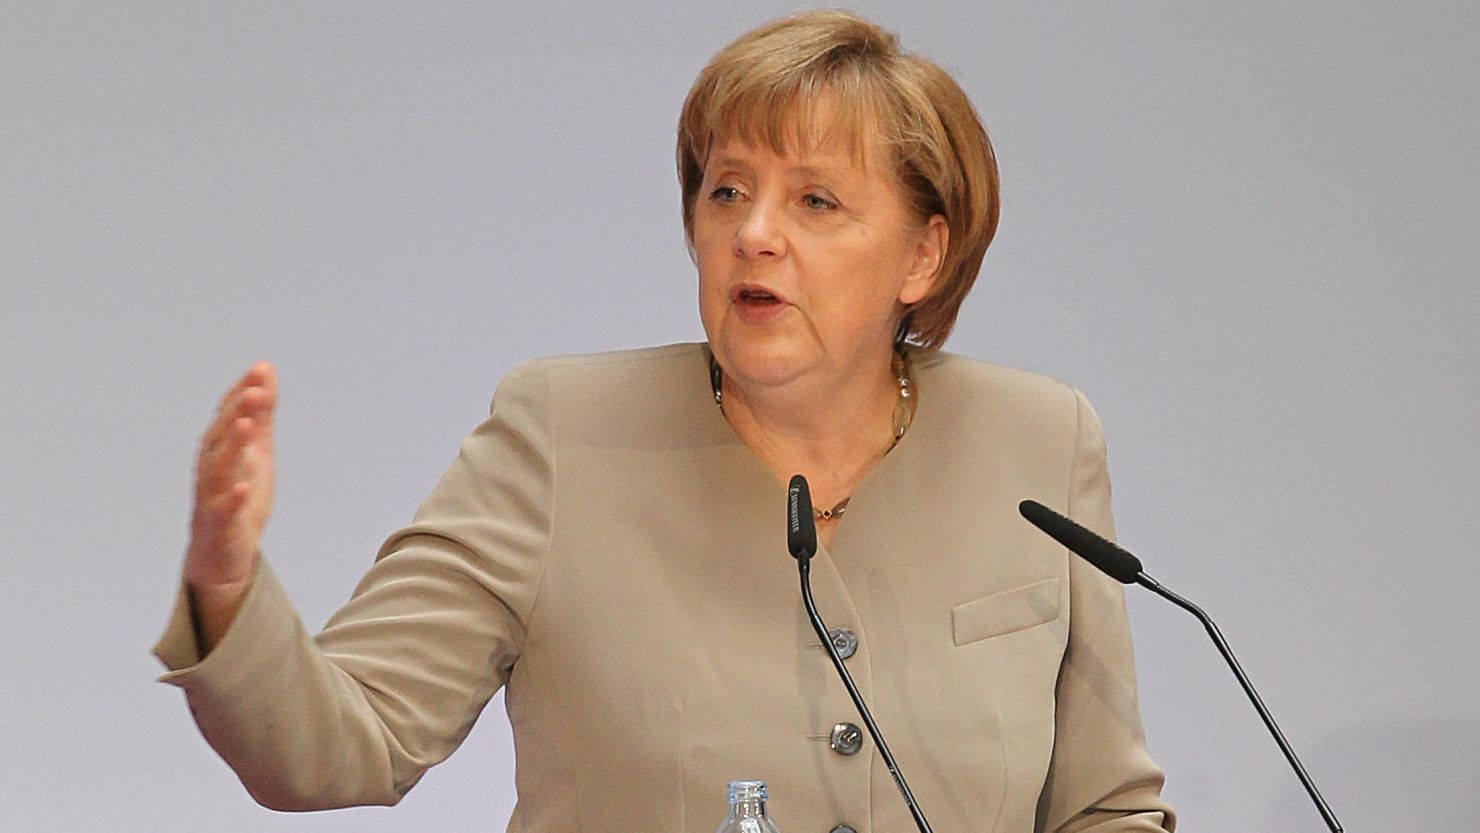 Responding to criticism, Angela Merkel, the German chancellor, has called for a strict European agreement on data protection.